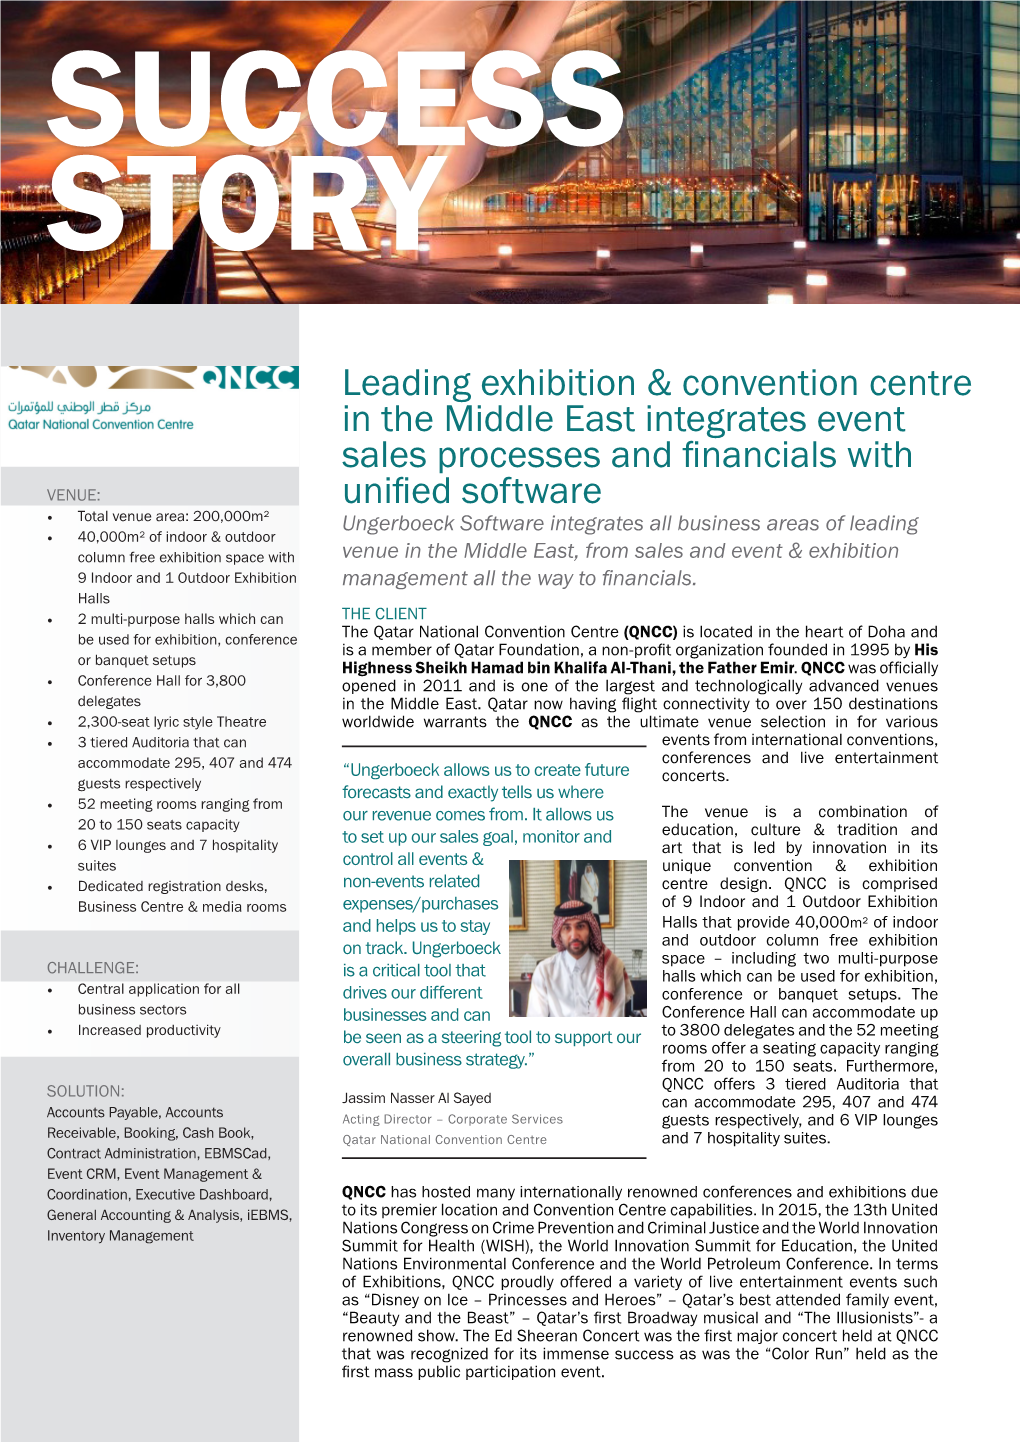 Leading Exhibition & Convention Centre in the Middle East Integrates